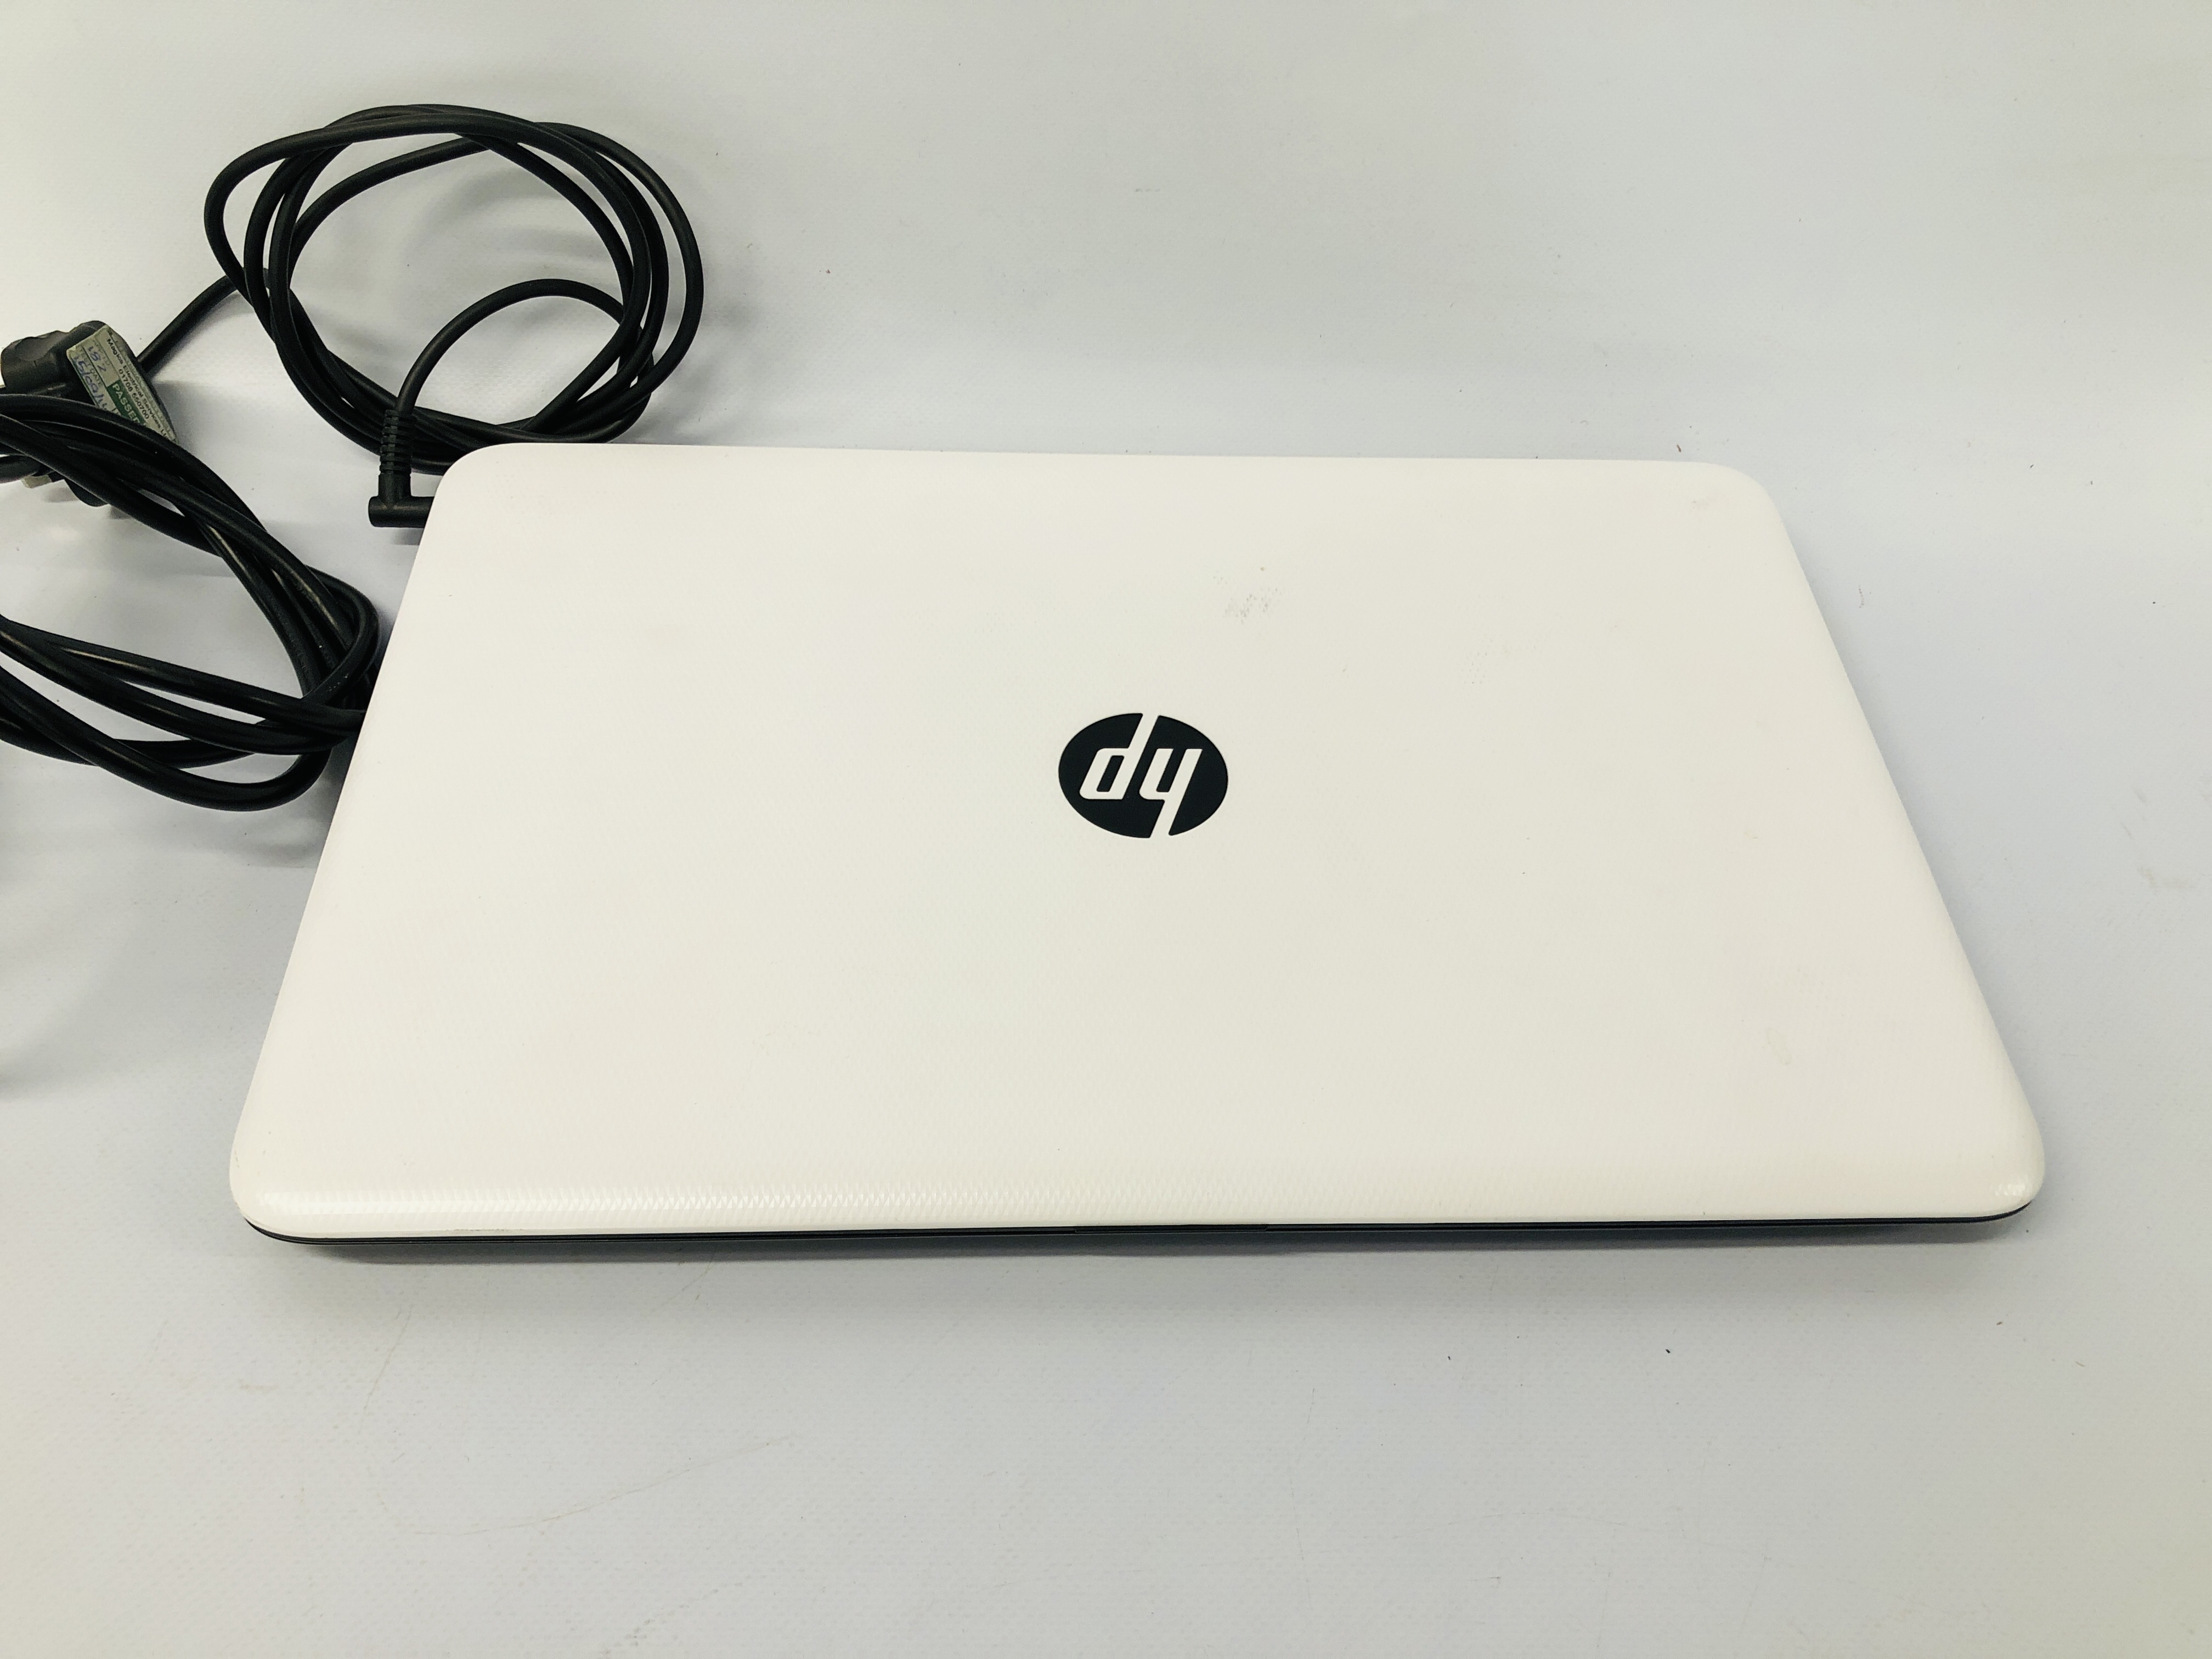 HP LAPTOP COMPUTER MODEL 15AC124NF CORE I3 WITH CAHRGER S/N CND5503HTV - NO GUARANTEE OF - Image 4 of 6